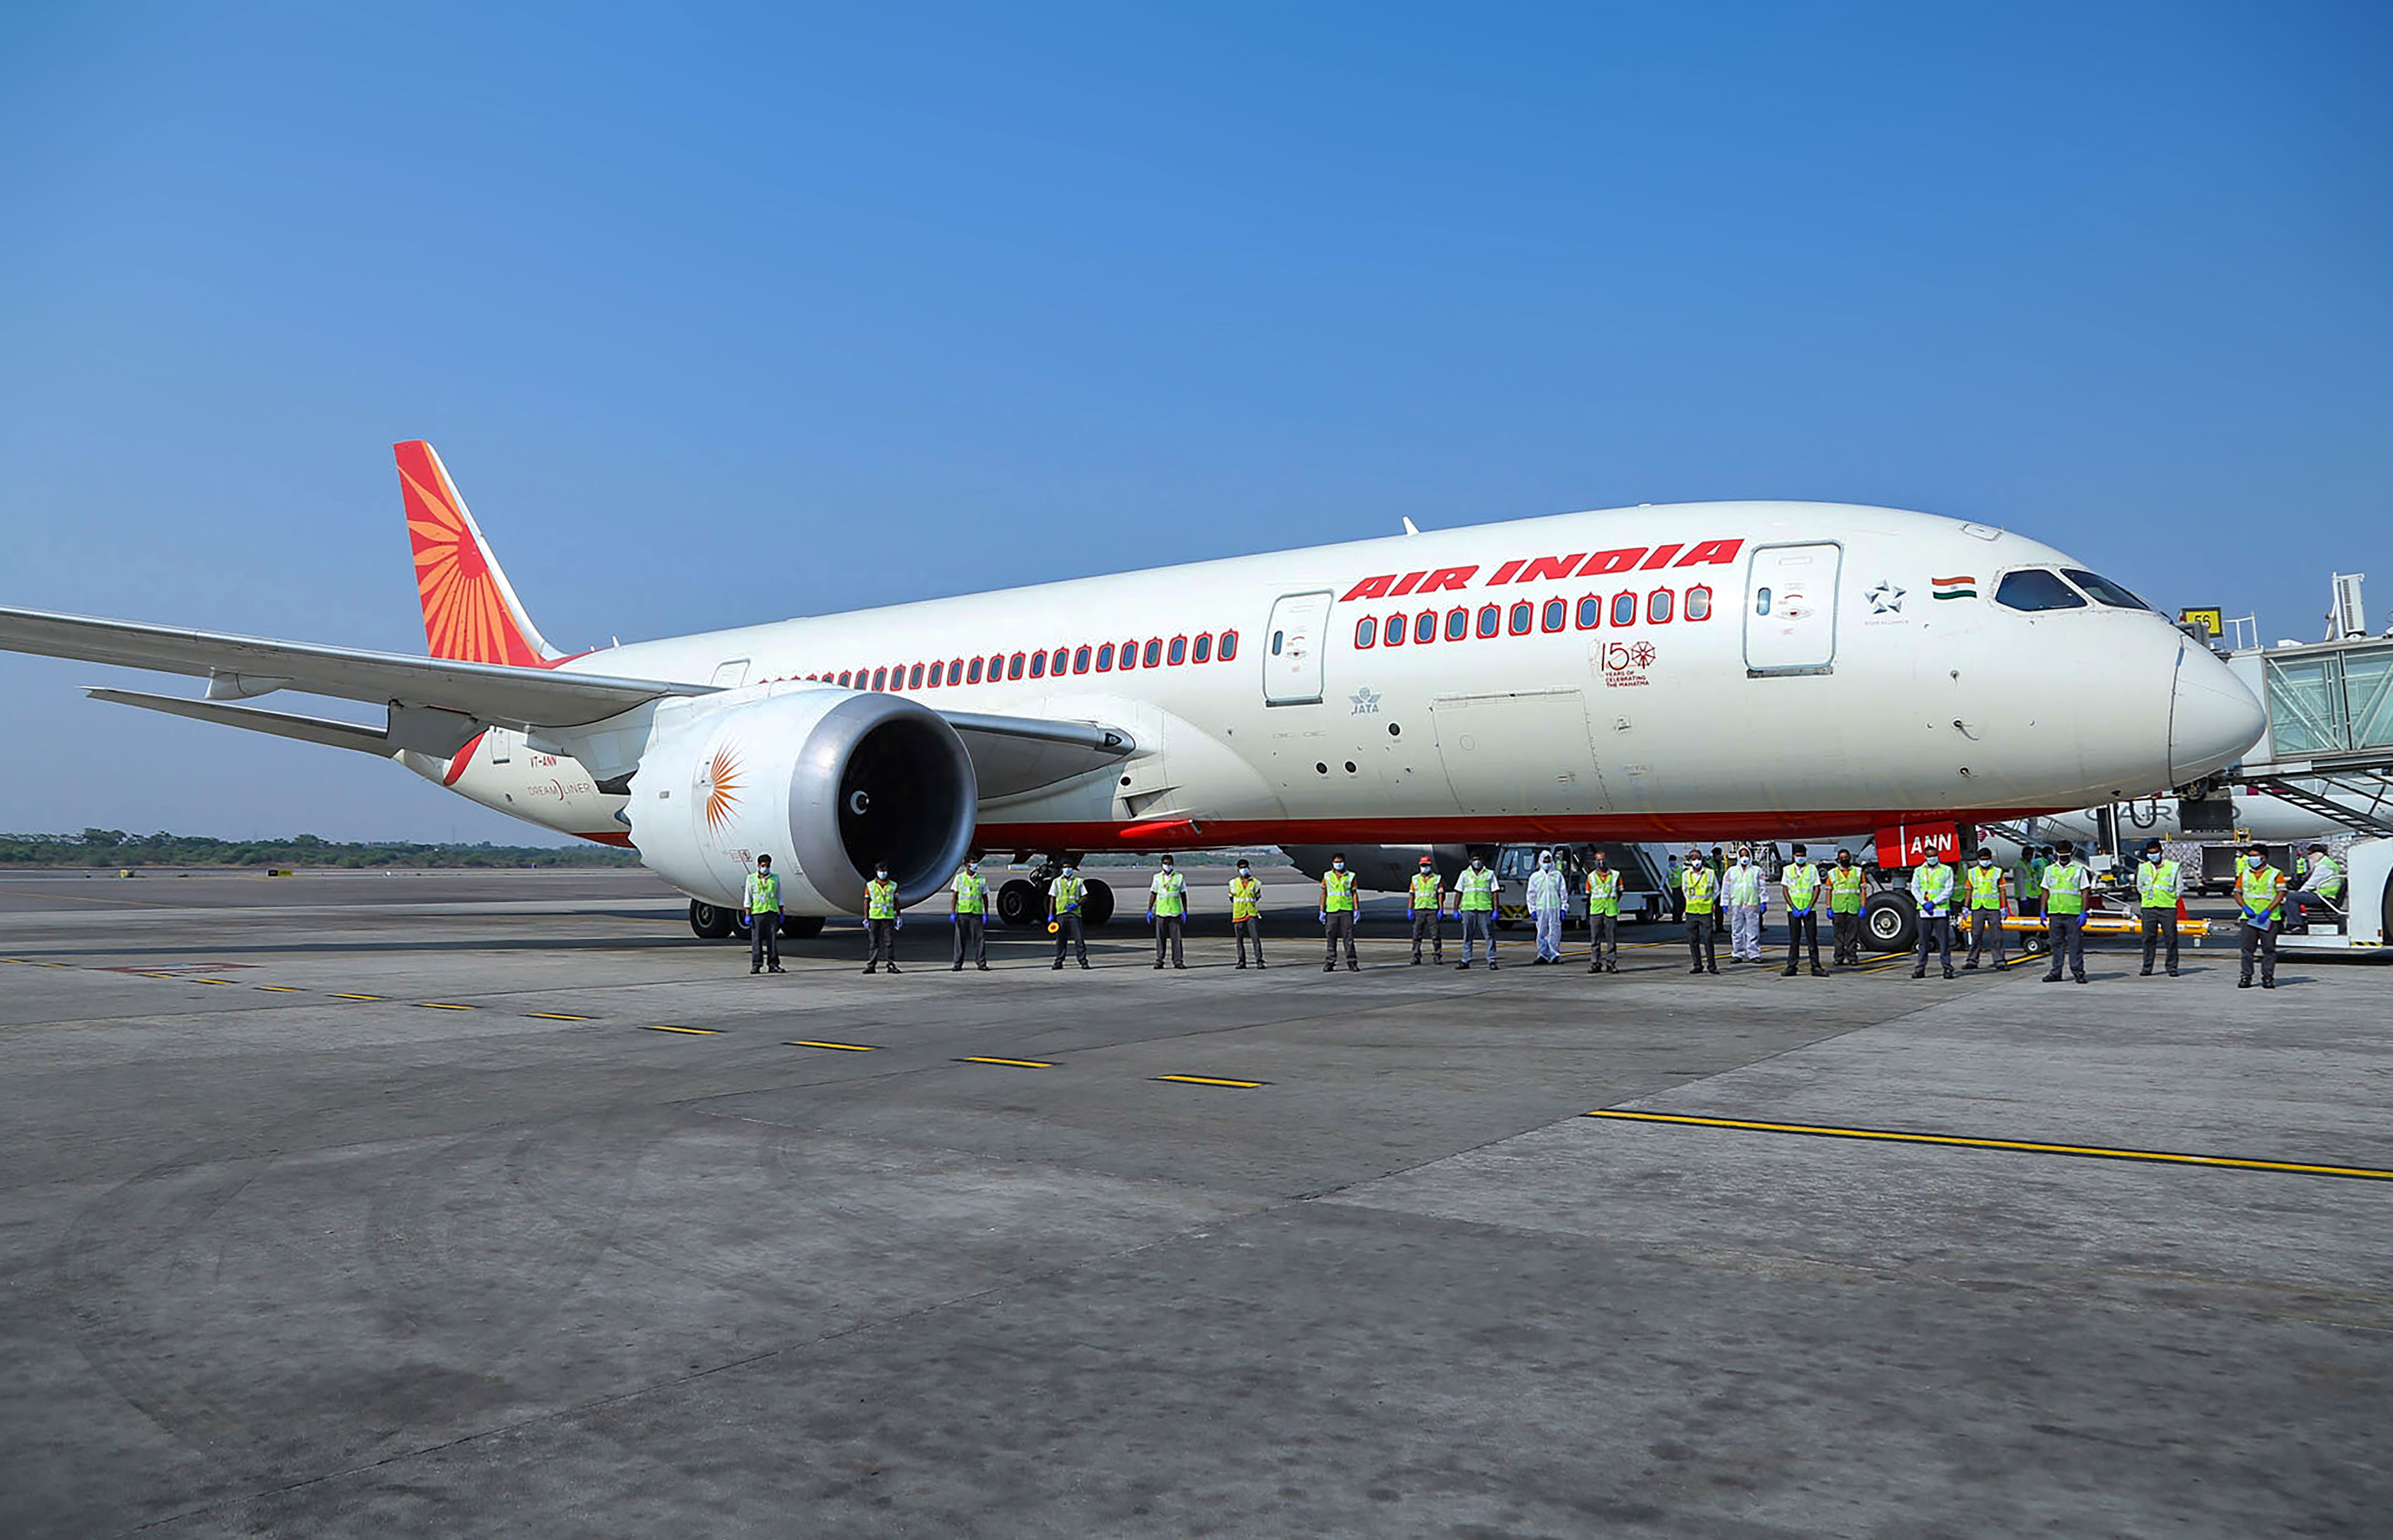 dgca issues show cause notice to air india over mumbai wheelchair incident involving 80-yr-old flyer